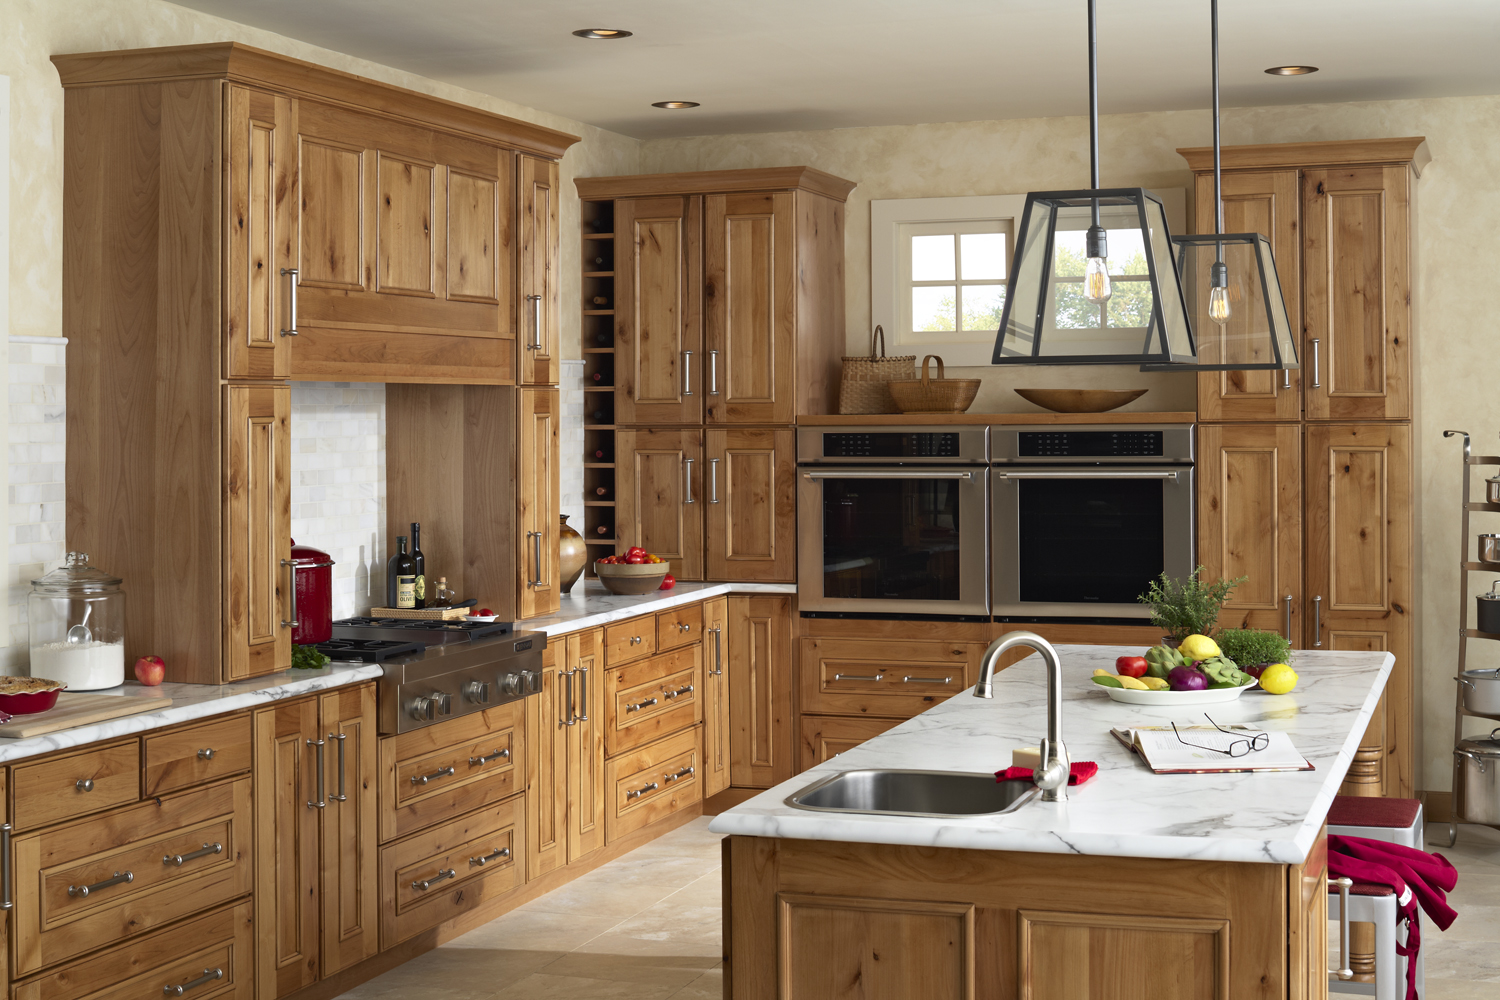 Kitchen Cabinet Materials Expensive, What Is The Most Expensive Wood For Cabinets